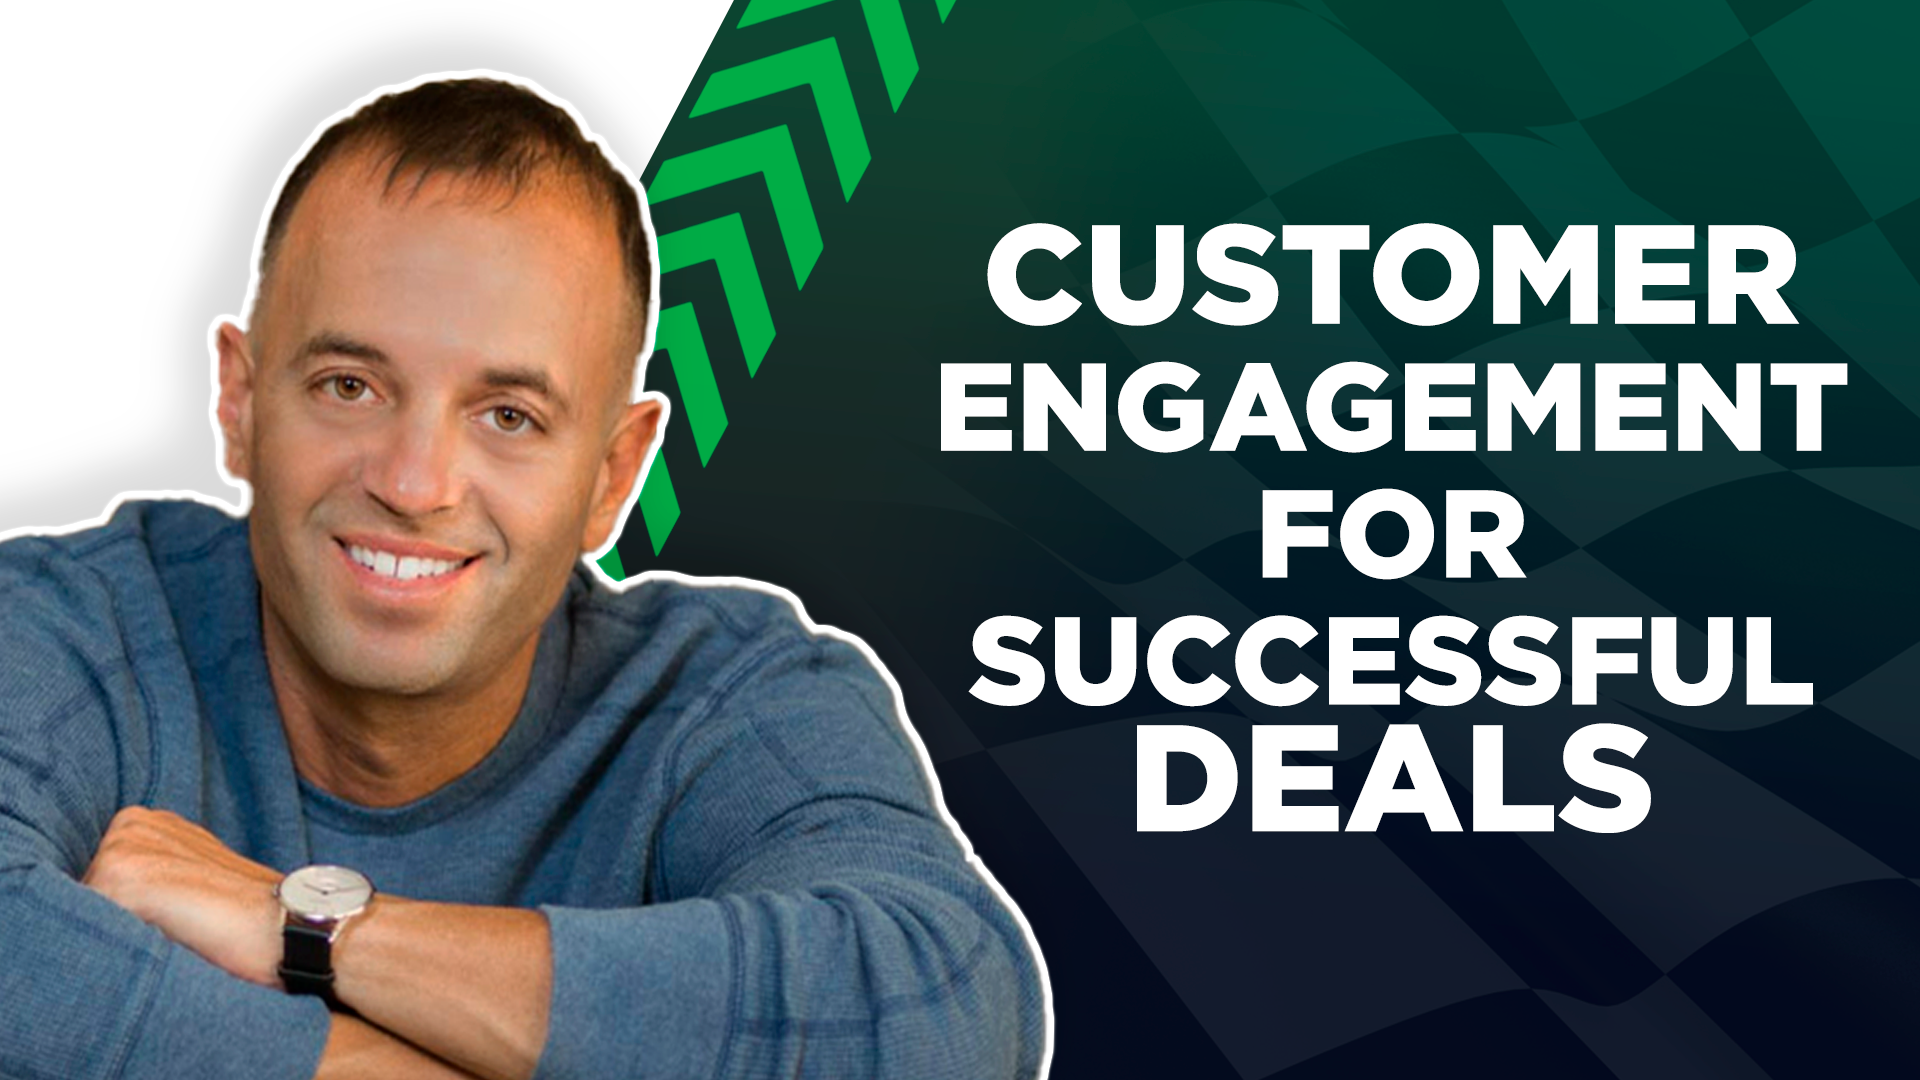 Podcast Pit Stop: Josh Braun on Customer Engagement for Successful Deals